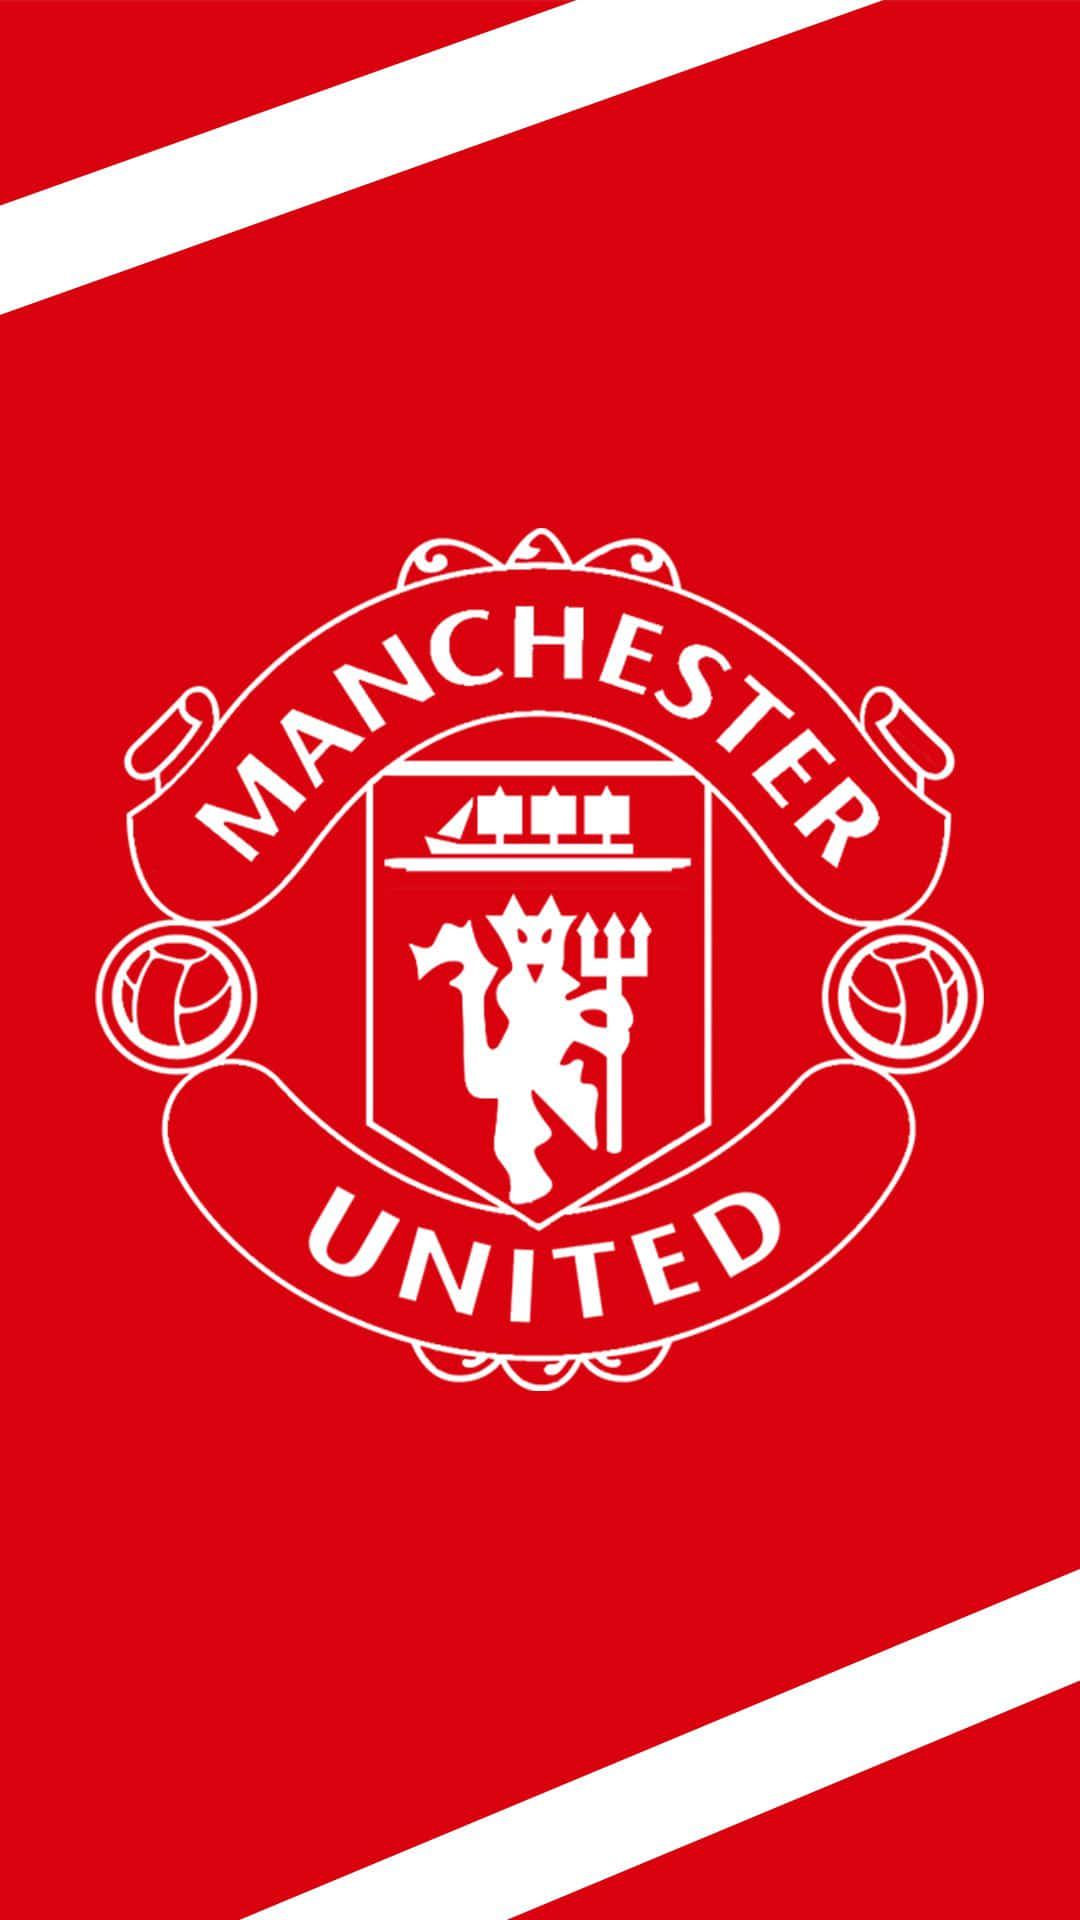 Free Manchester United iPhone Wallpaper Downloads, Manchester United iPhone Wallpaper for FREE